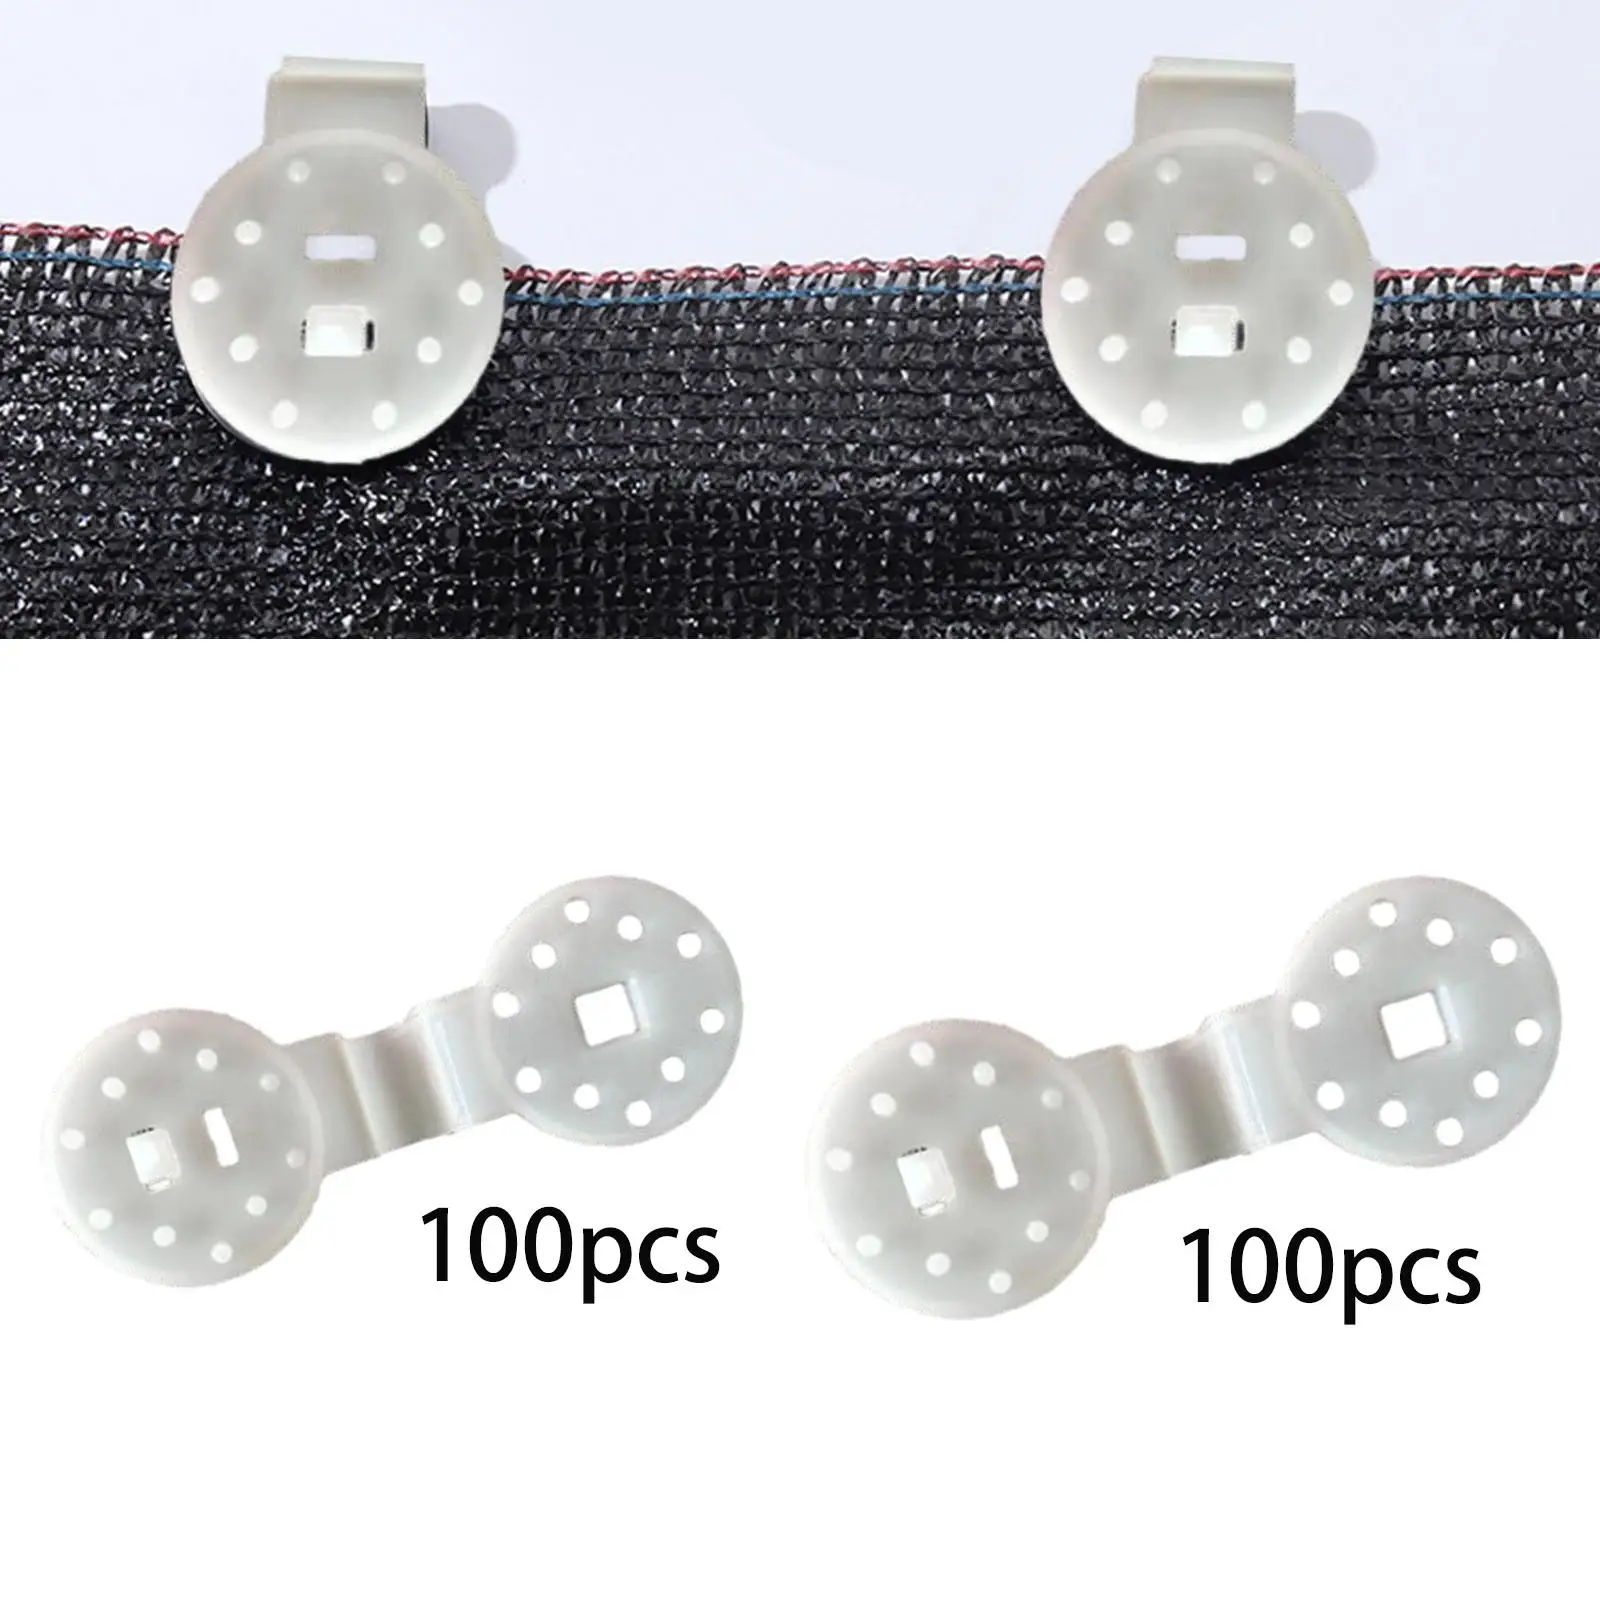 100Pcs Shade Cloth Clips Tightener Shade Net Clips Awning Clamp for Garden Netting Boat Cover Shade Net Anti Bird Netting Patio